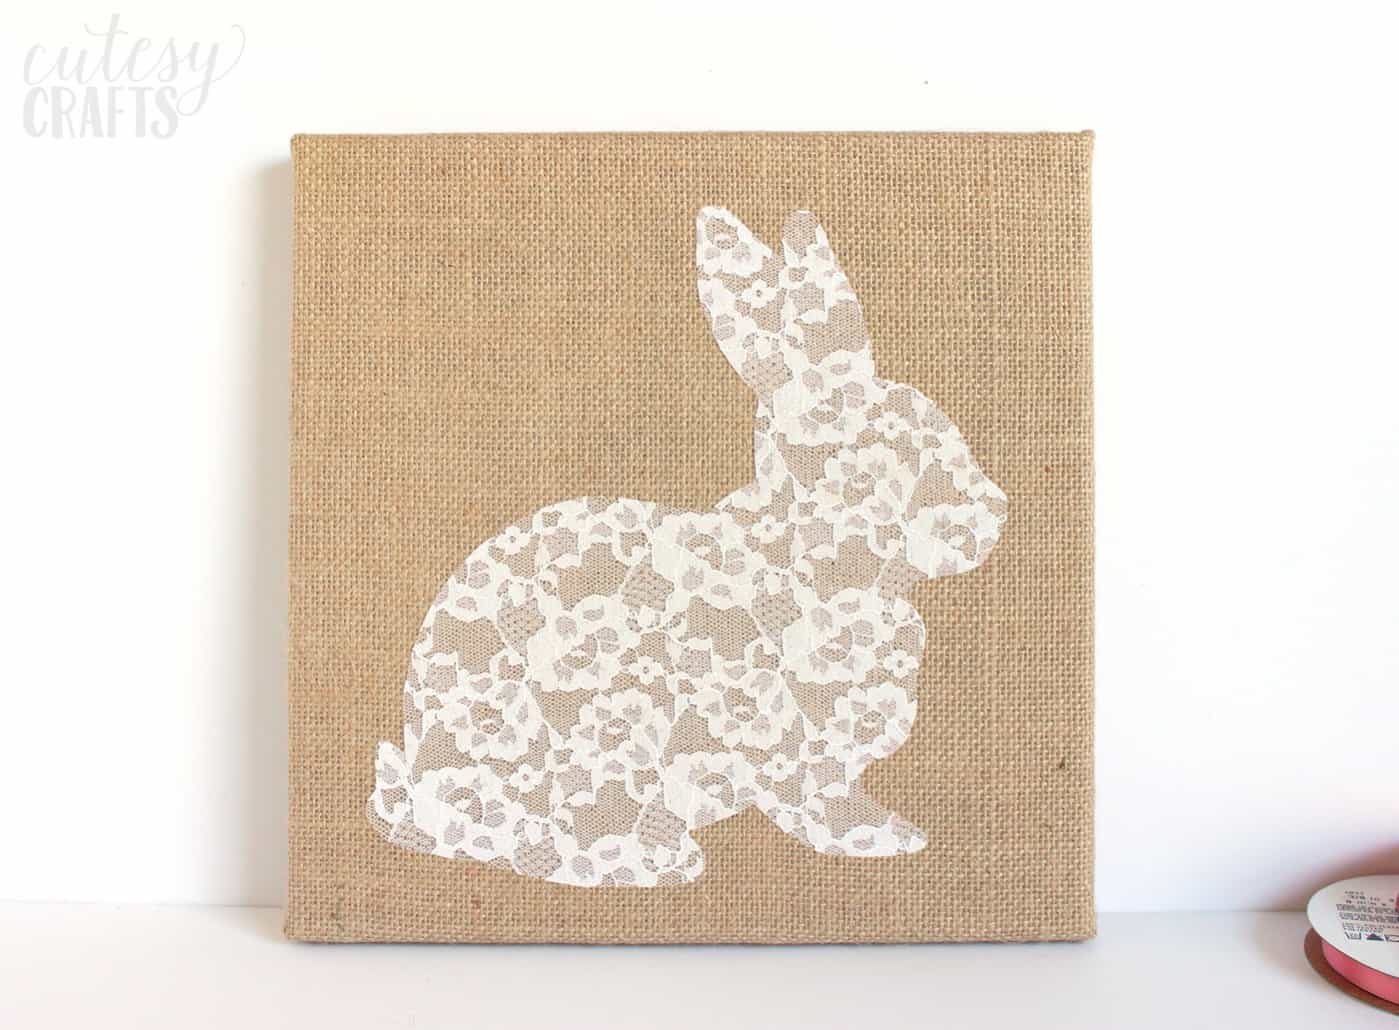 Lace rabbit shape attached to canvas